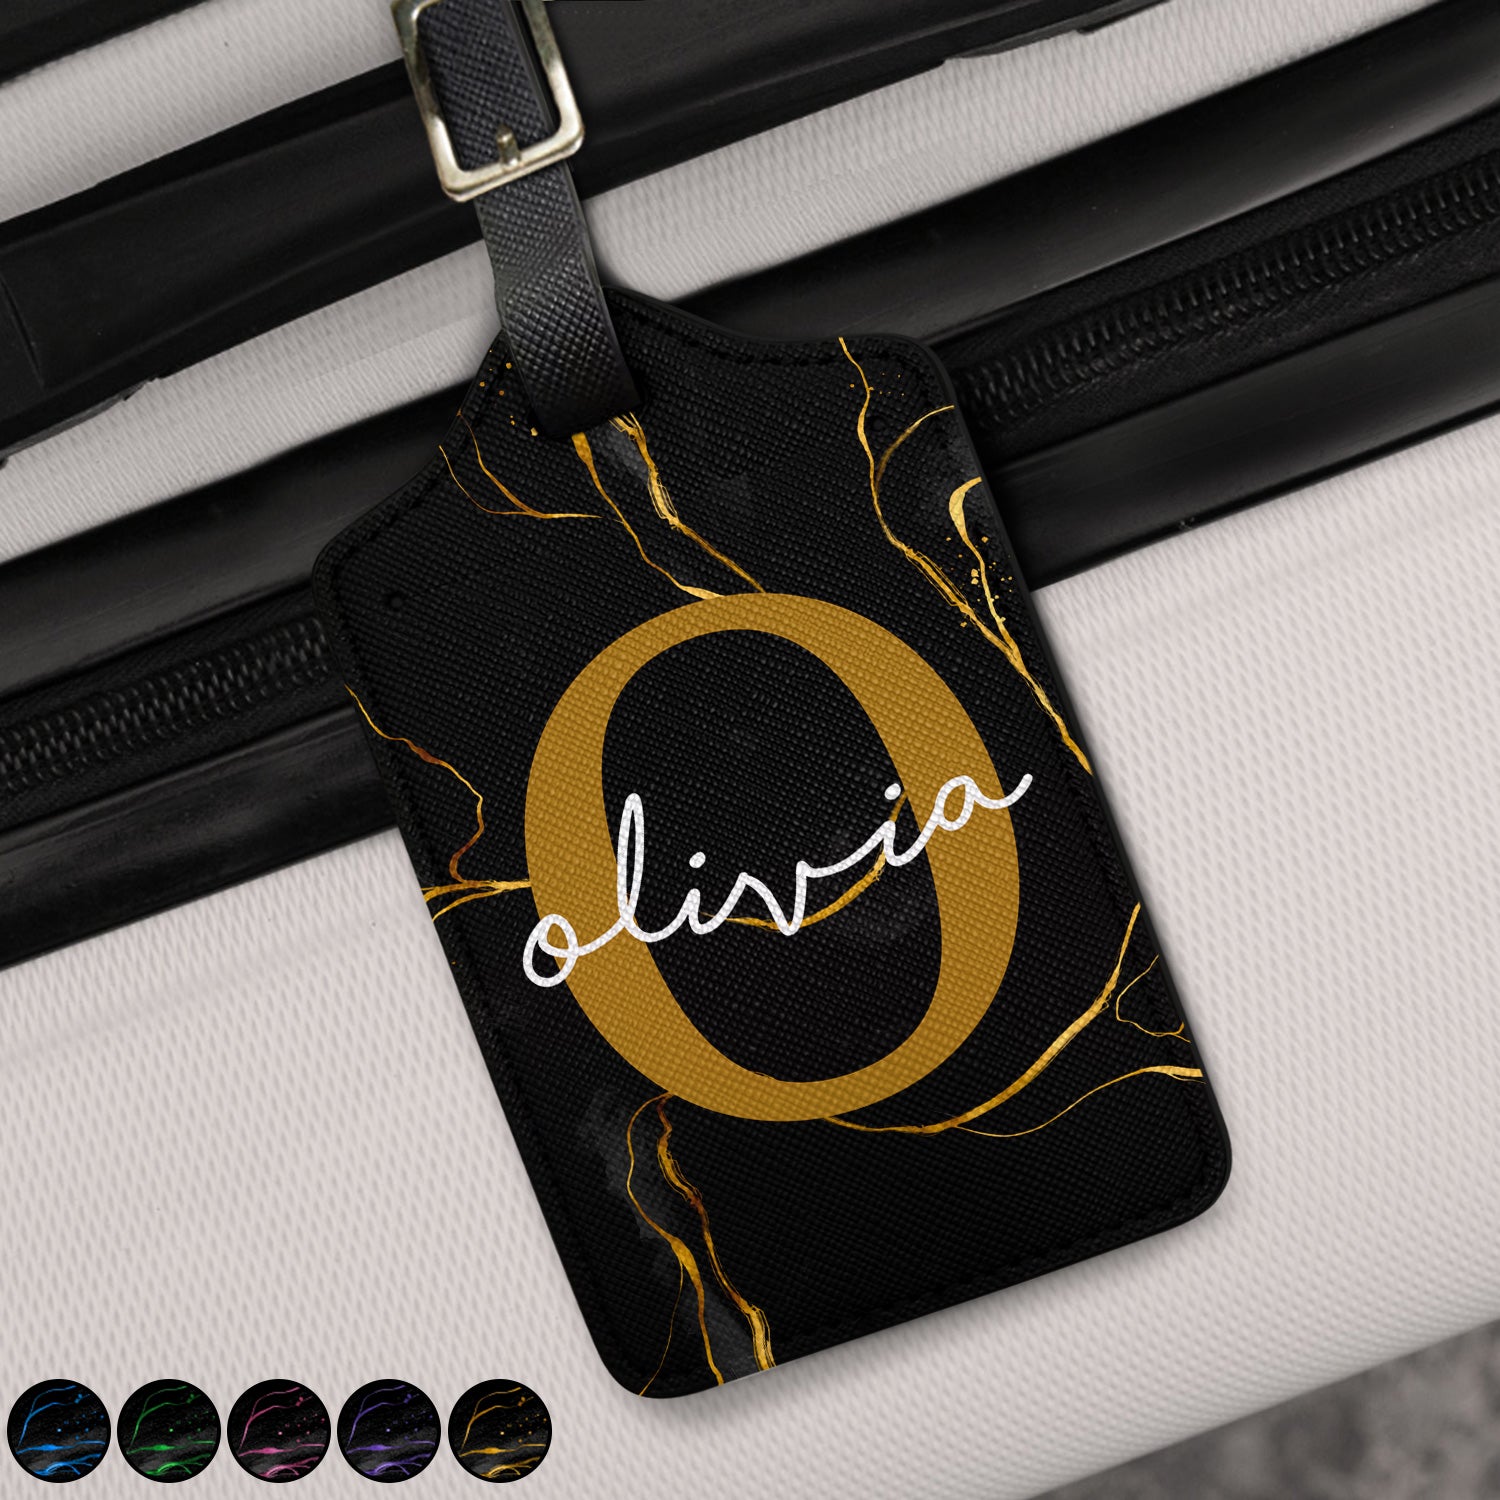 Letter Monogram Aesthetic Style - Gift For Traveling Lovers, Travelers, Him, Her, BFF Best Friends, Besties - Personalized Luggage Tag